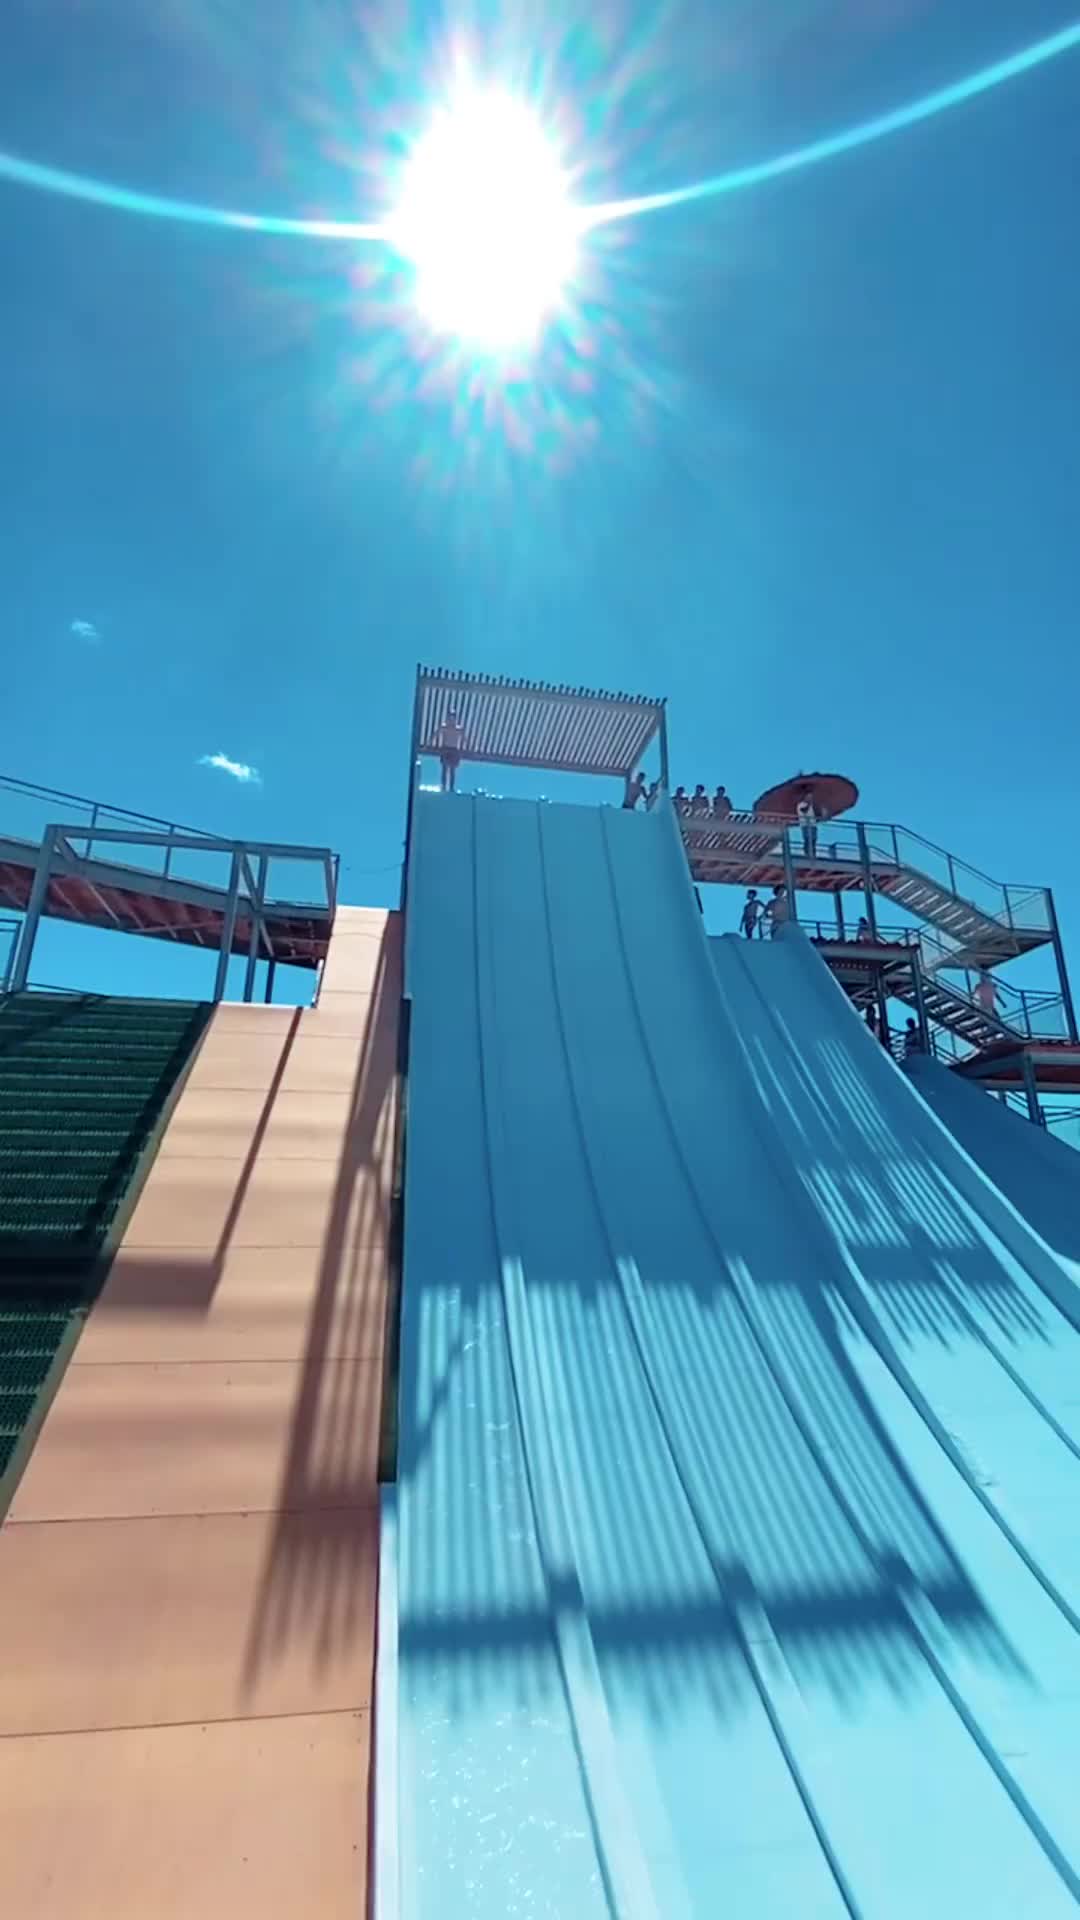 Extreme Water Jump Stunt at Frenzy Waterpark